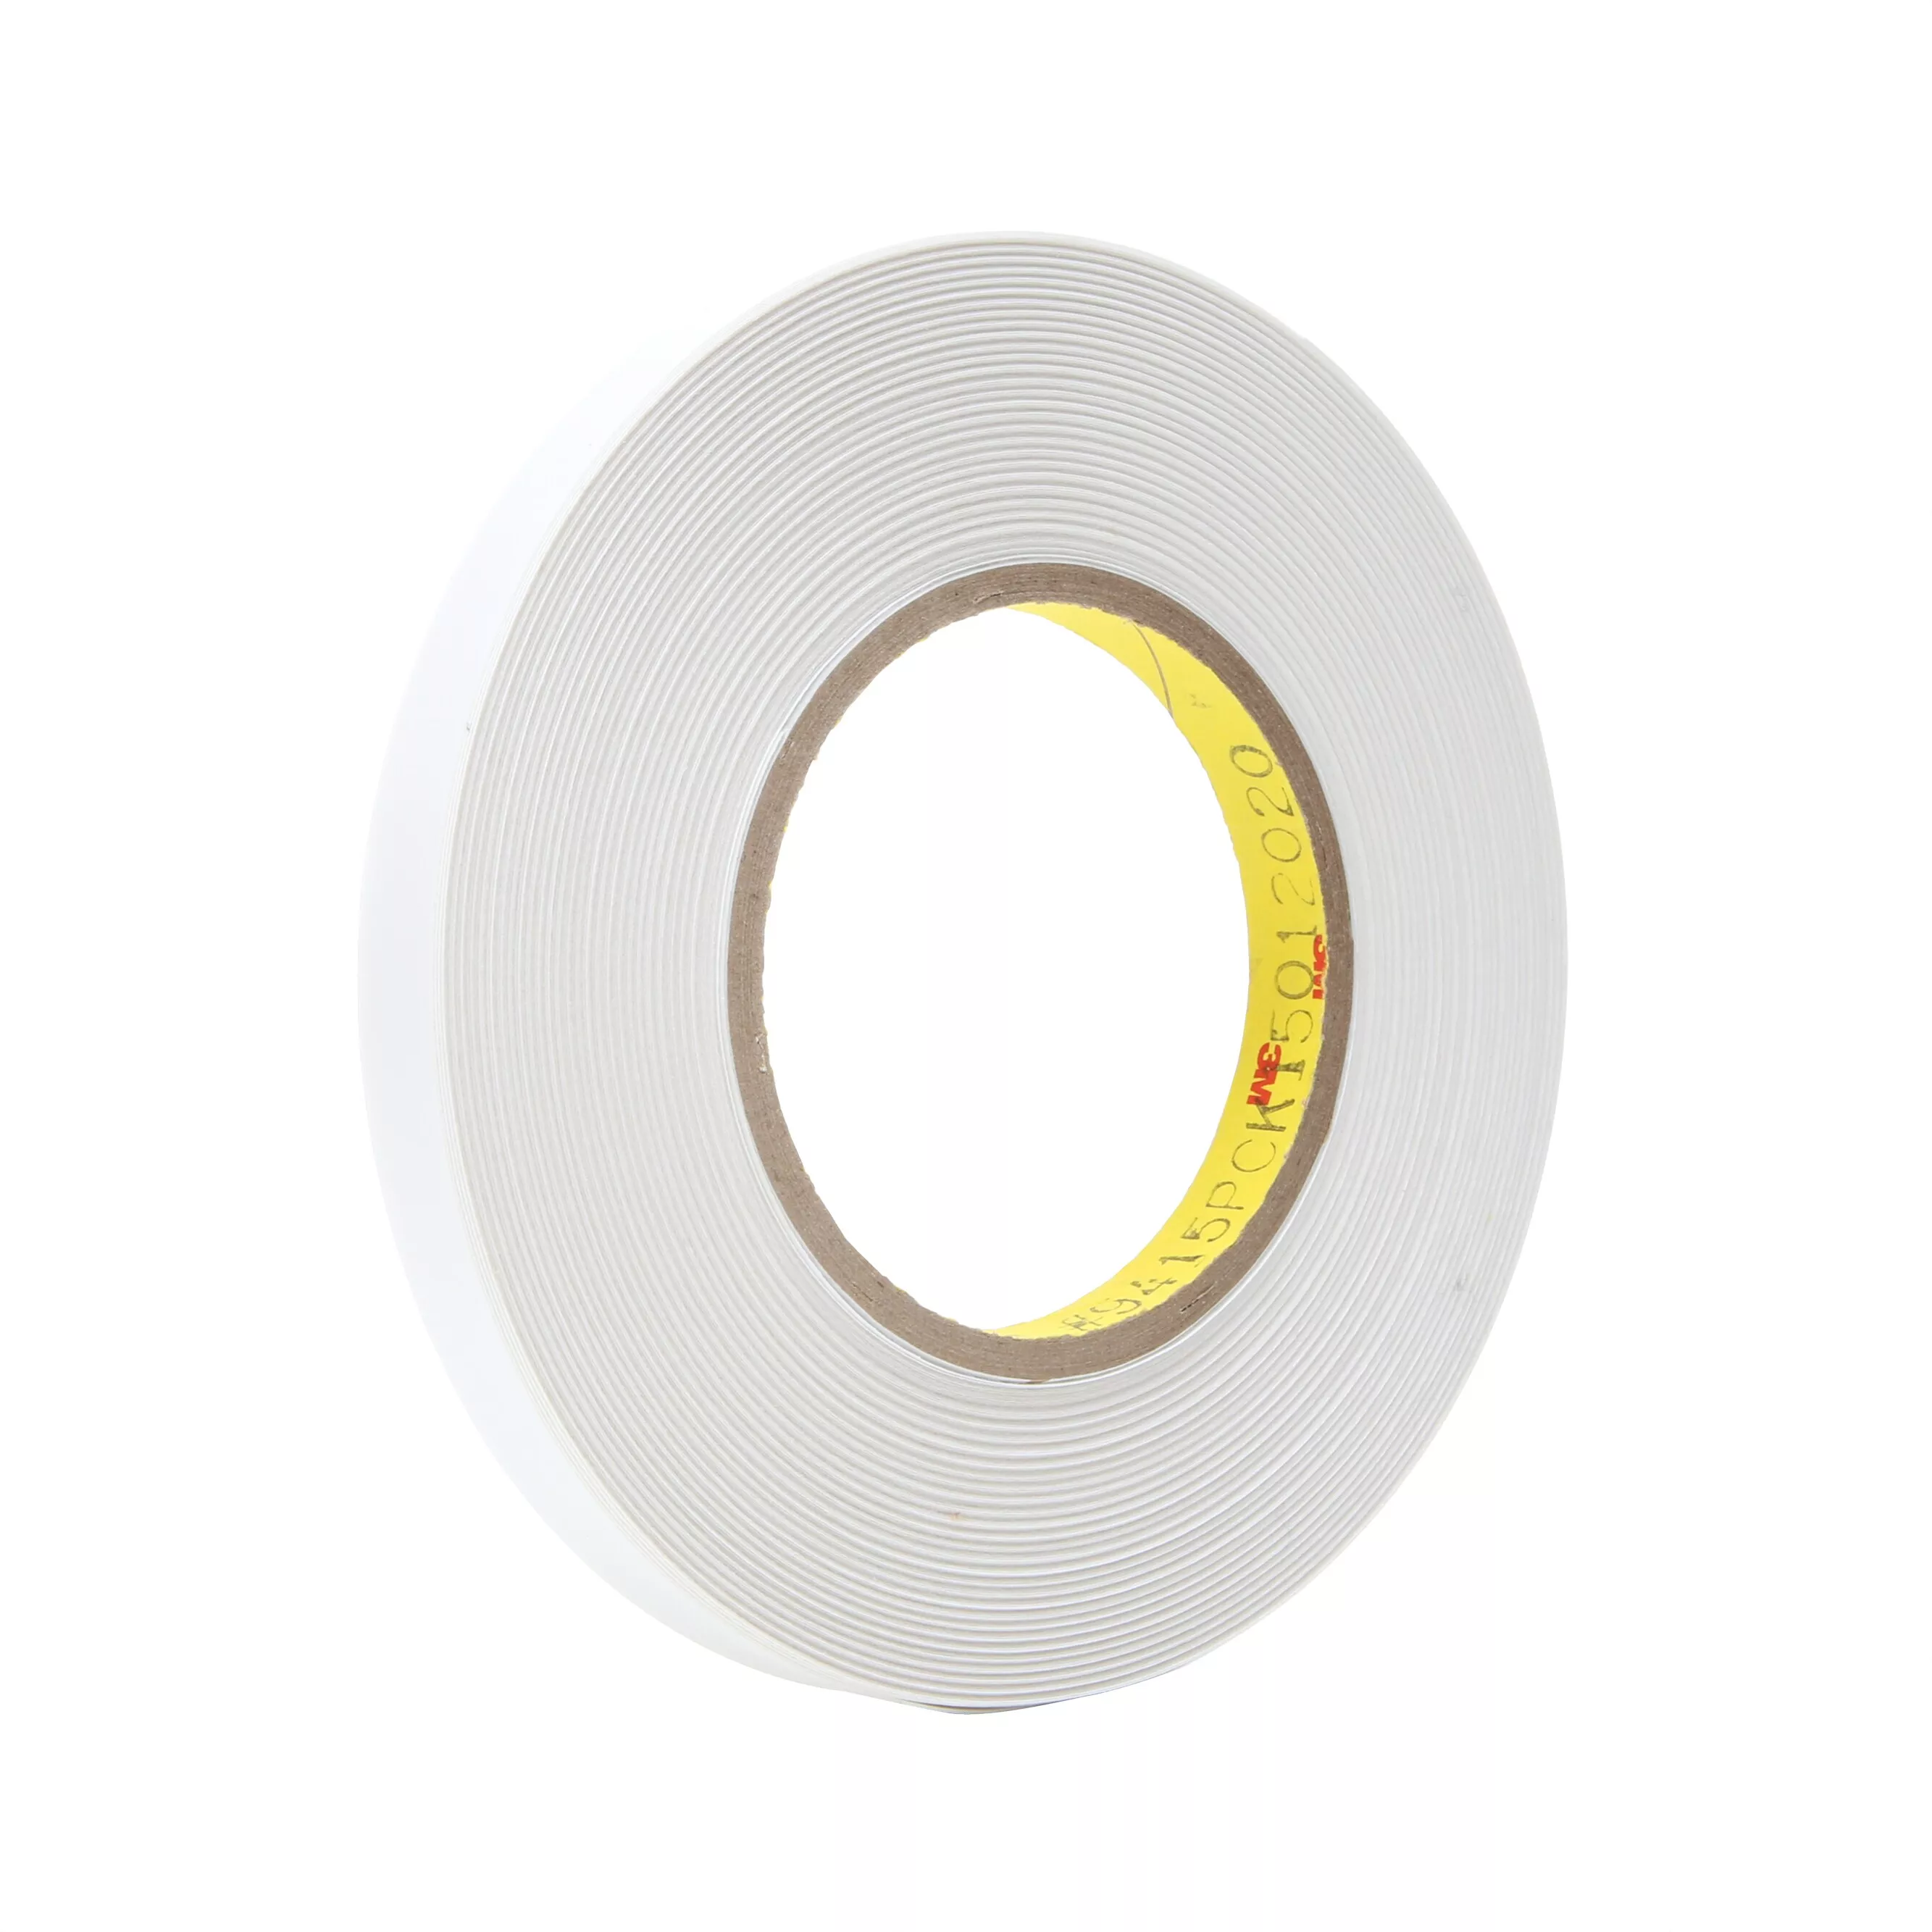 3M™ Removable Repositionable Tape 9415PC, Clear, 1/4 in x 72 yd, 2 mil,
144 Rolls/Case